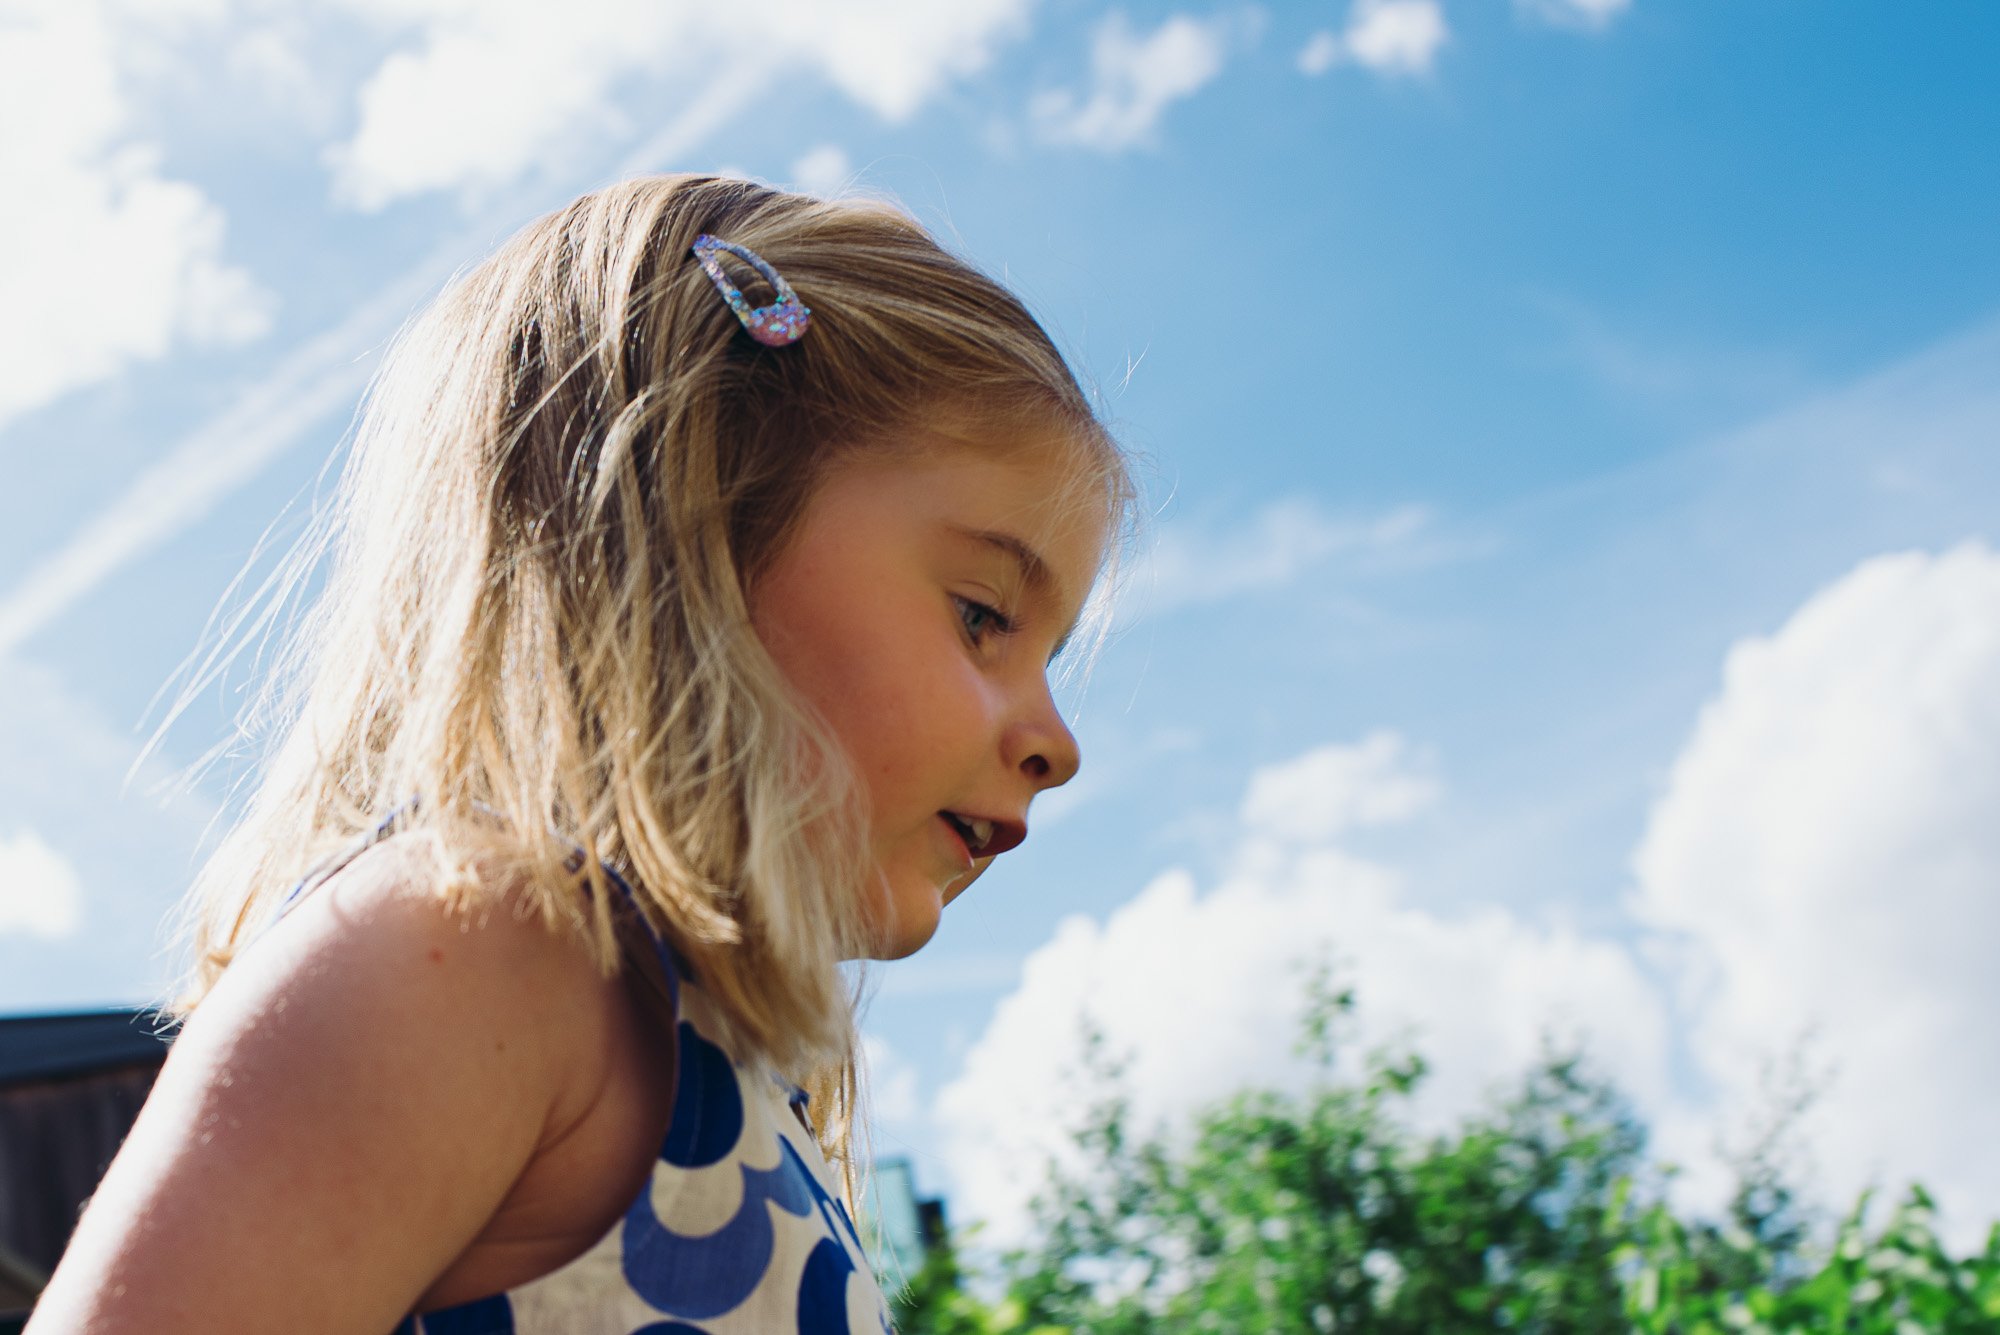 east-dulwich-family-photographer-london-photoshoot-reportage-style-family-photography-portrait-girl-blue-sky.jpg